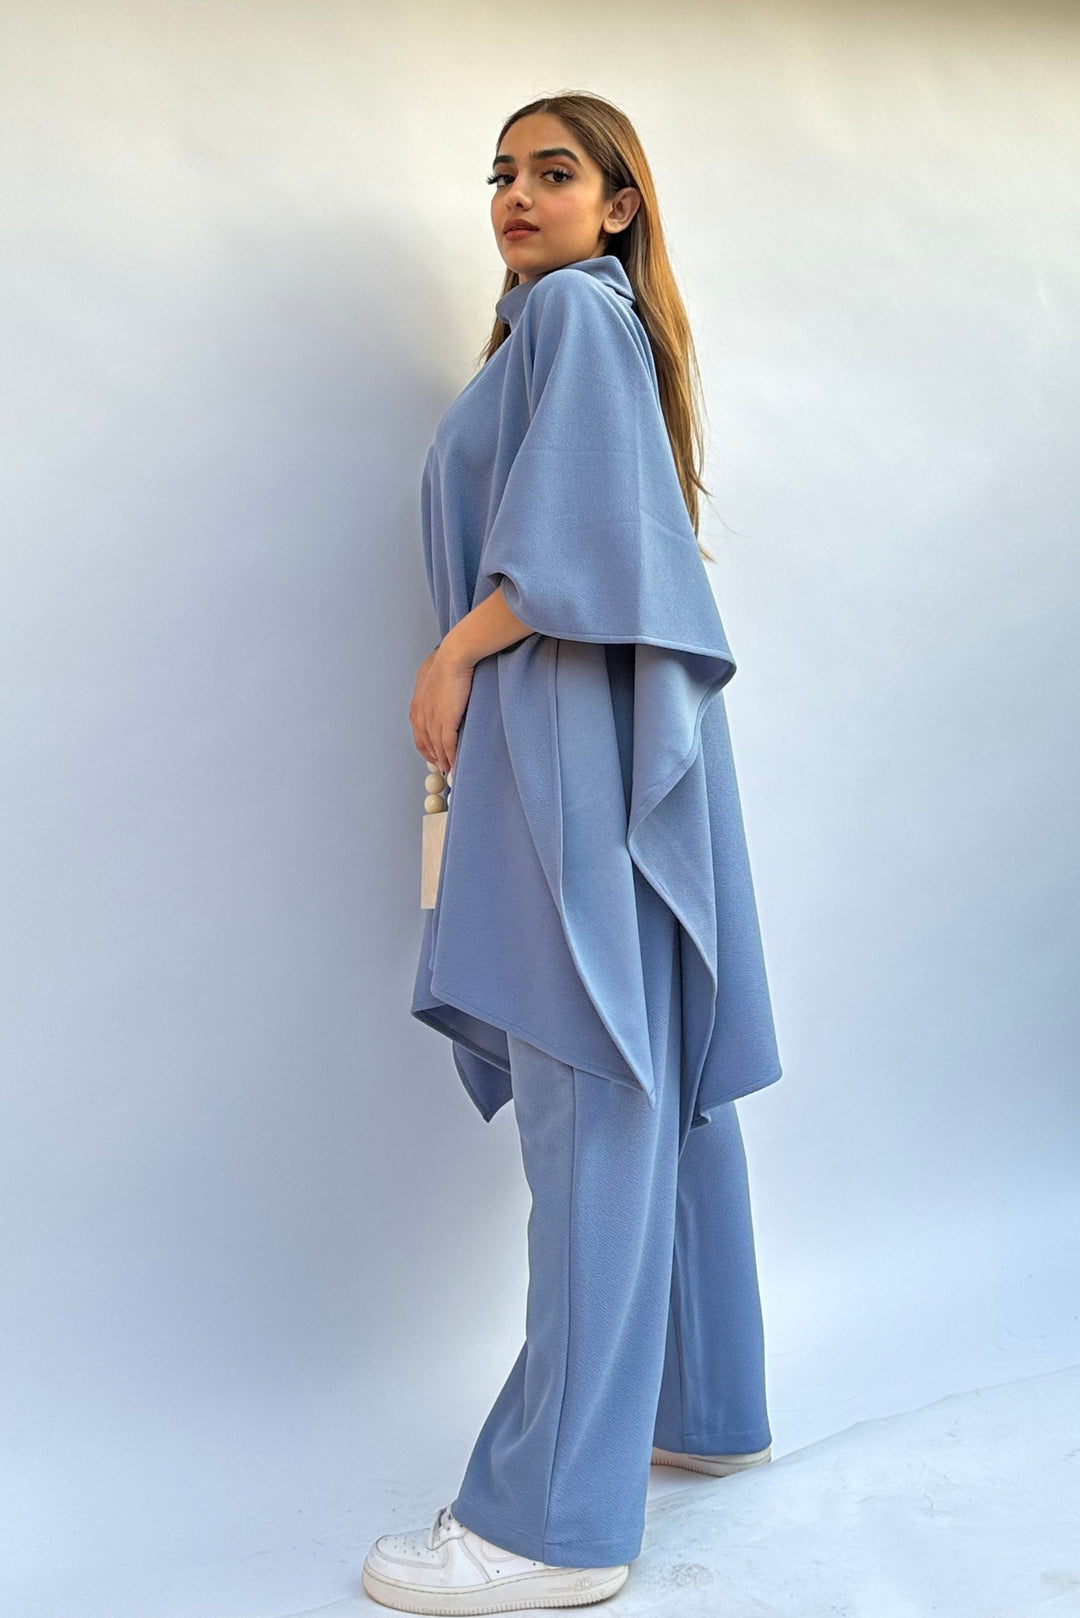 Soft knit pale blue poncho Coord Outfit